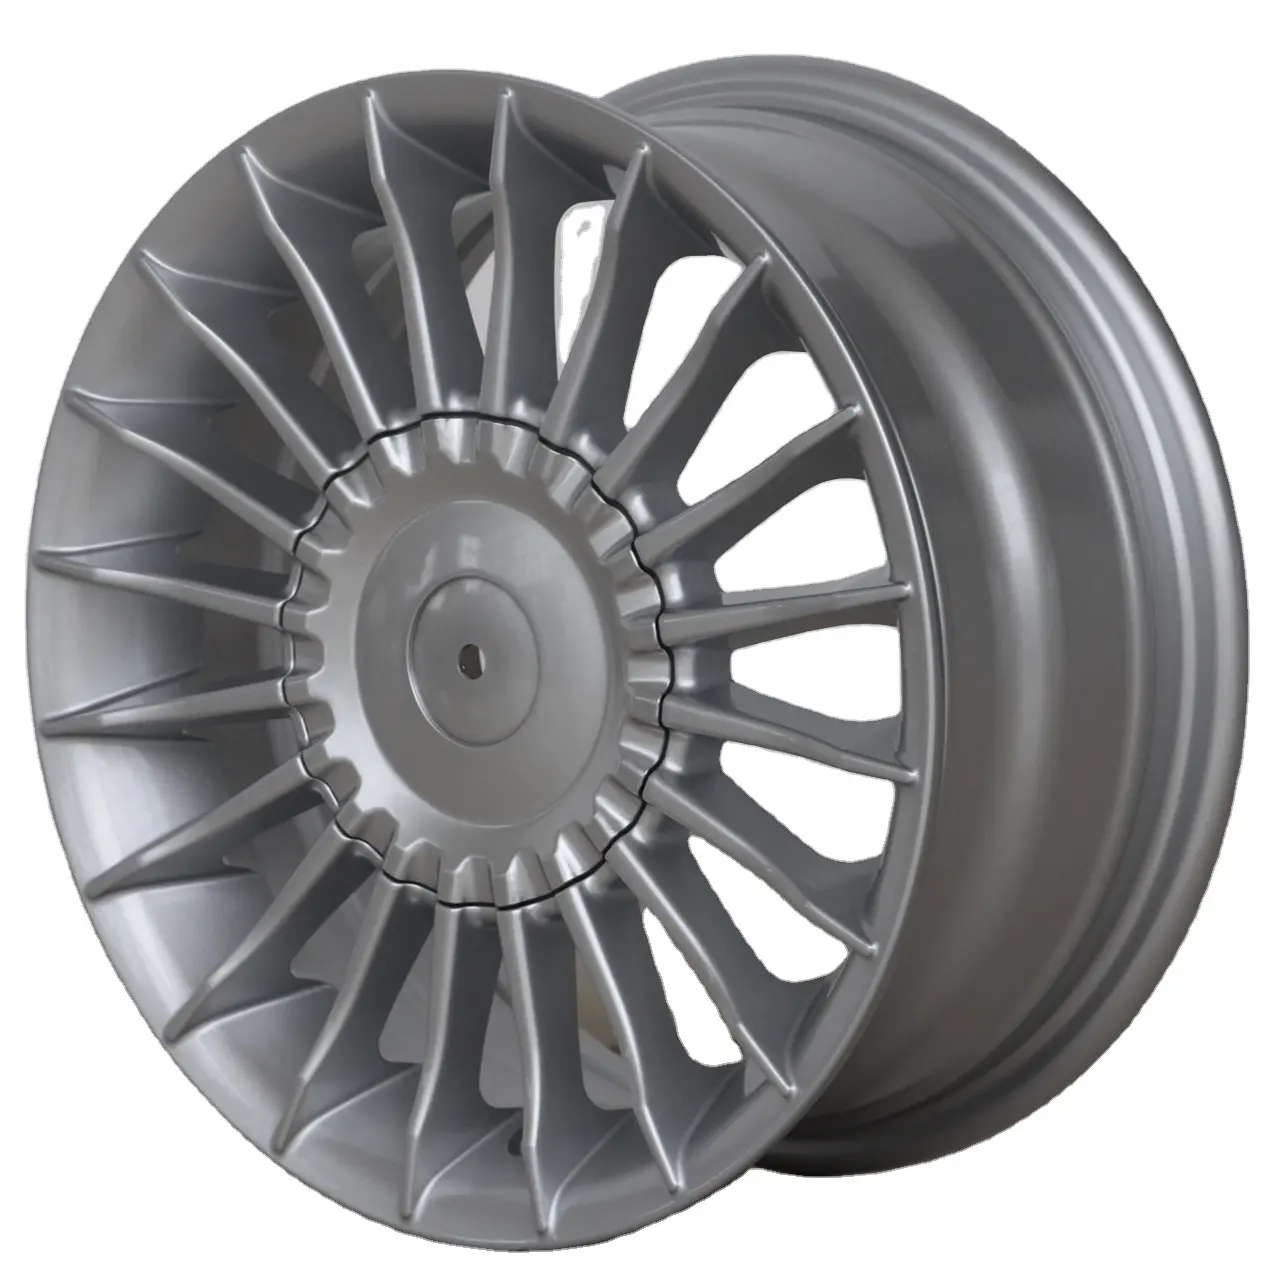 14 15 inch 8 lugs 8*100 8*114.3 alloy wheel rims interval adjustable PCD silver with full hub cover